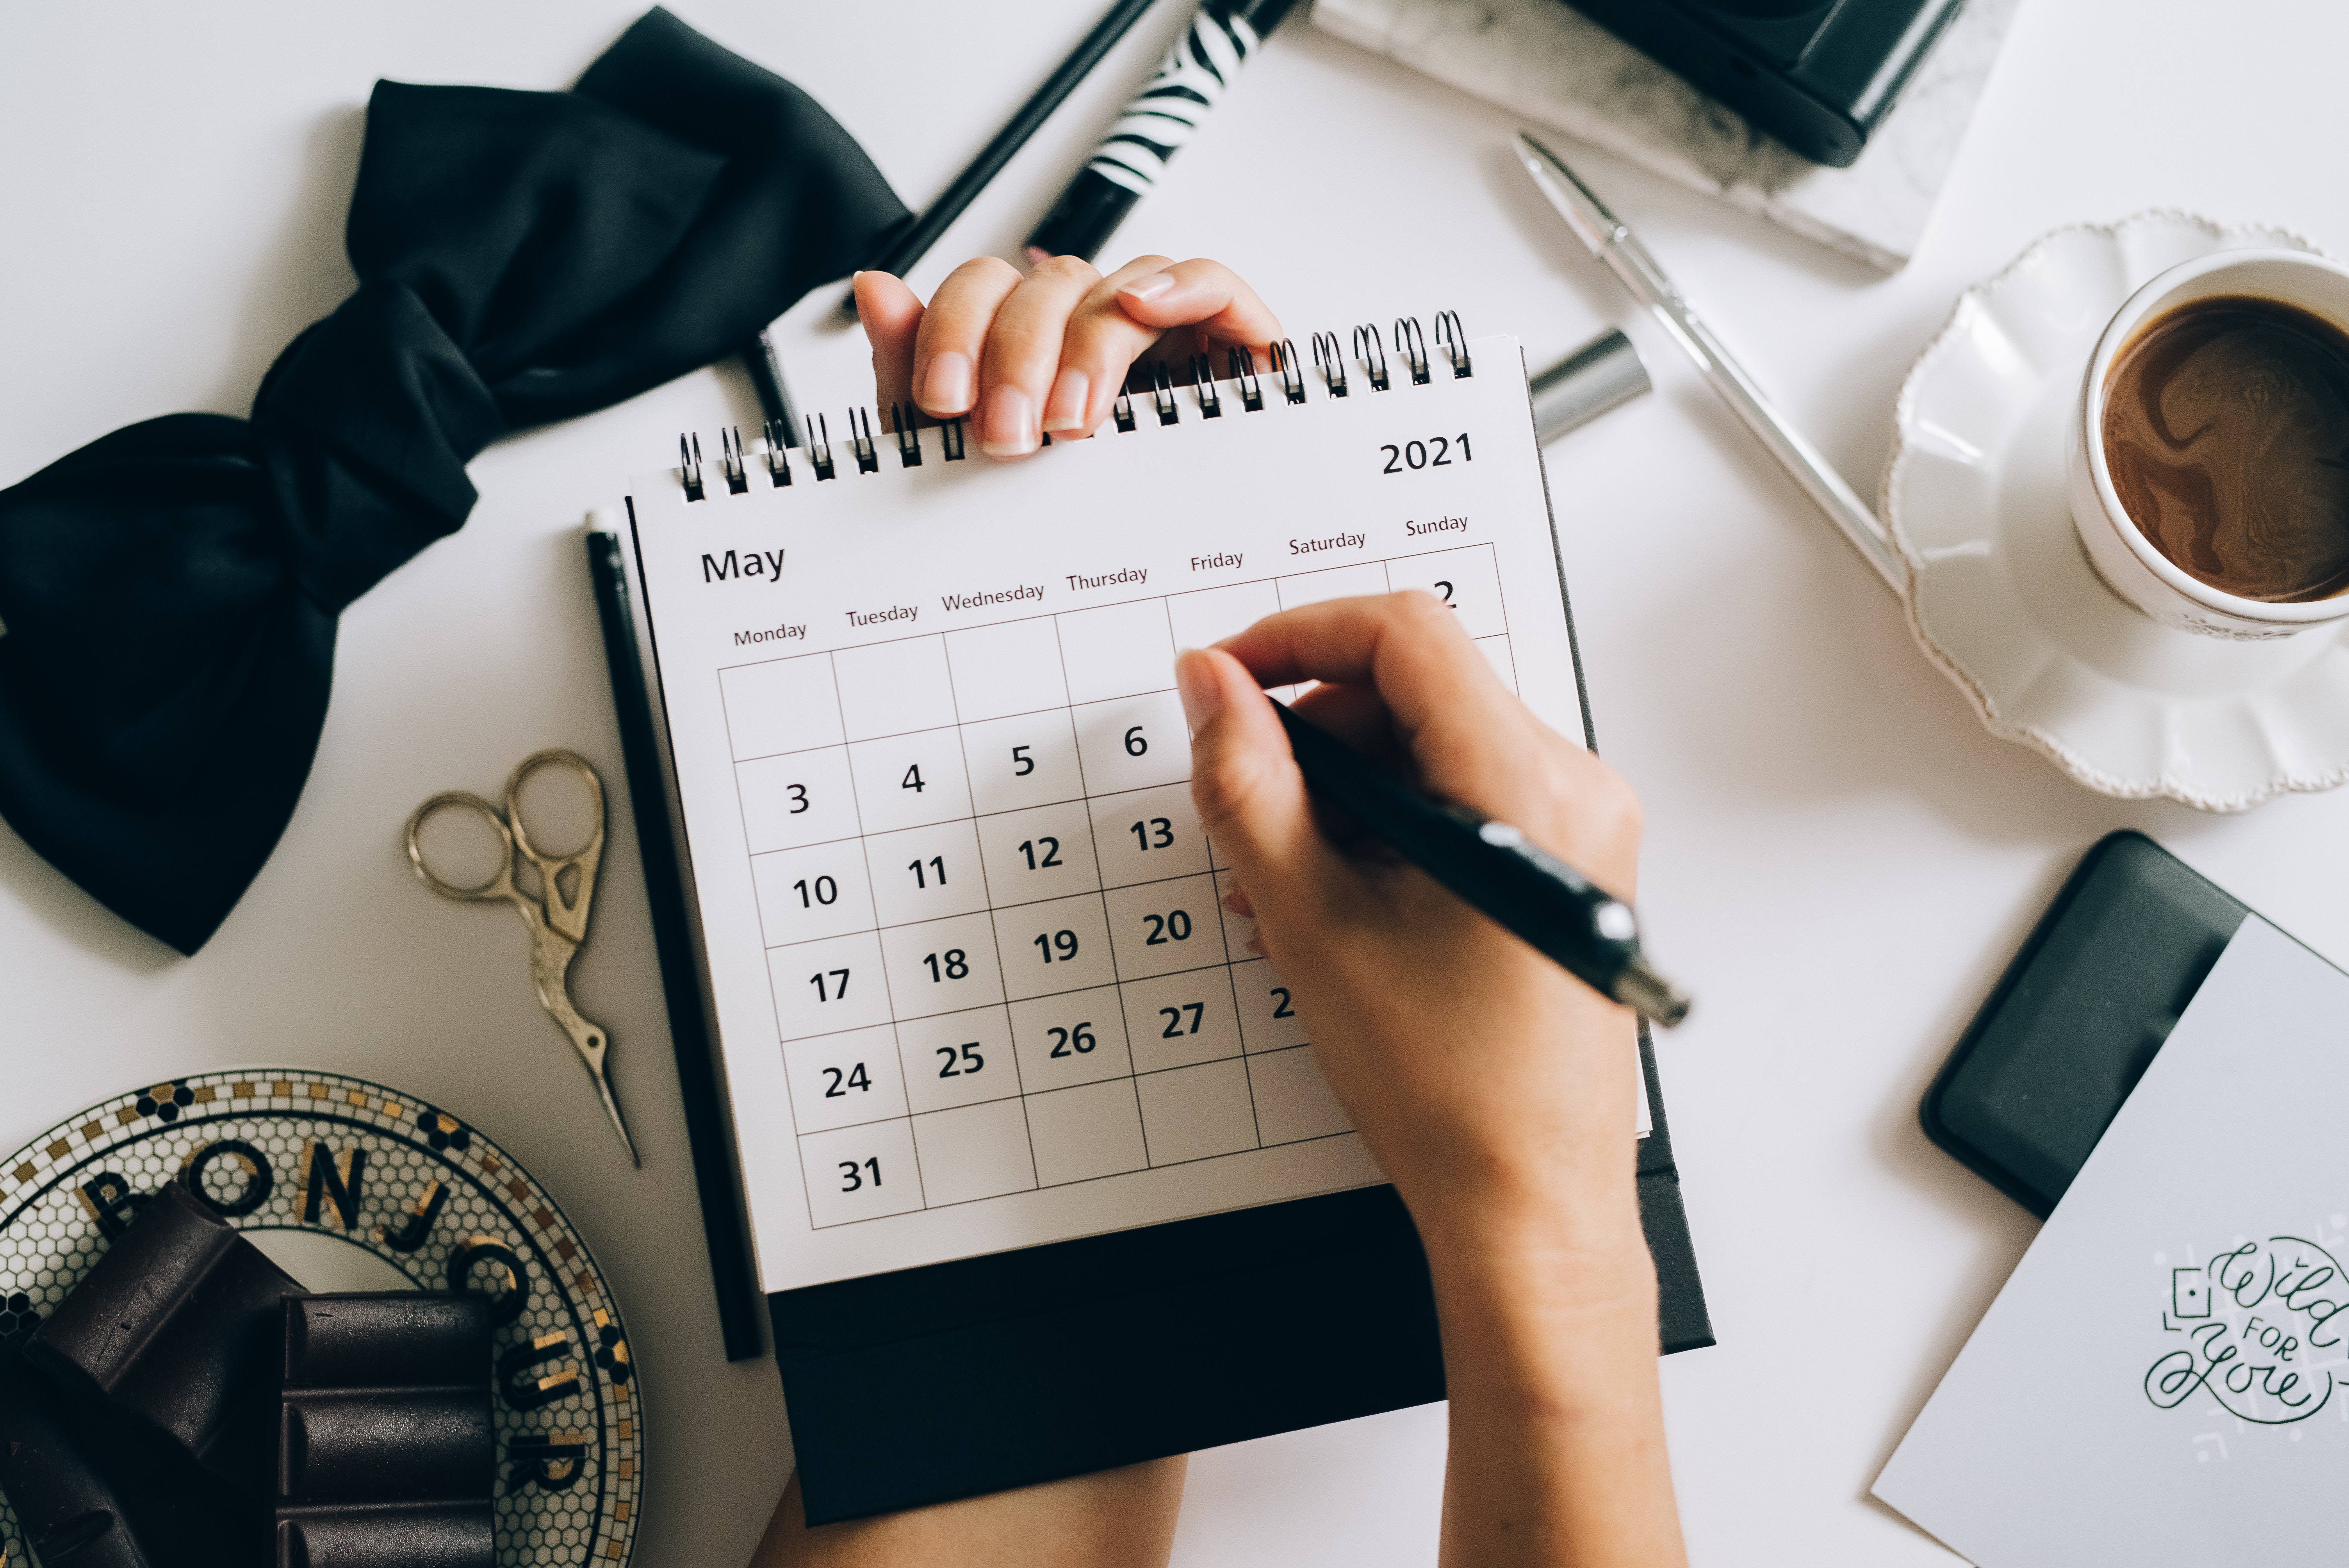 8 Virtual Startup Events to Get on Your Q2 Calendar